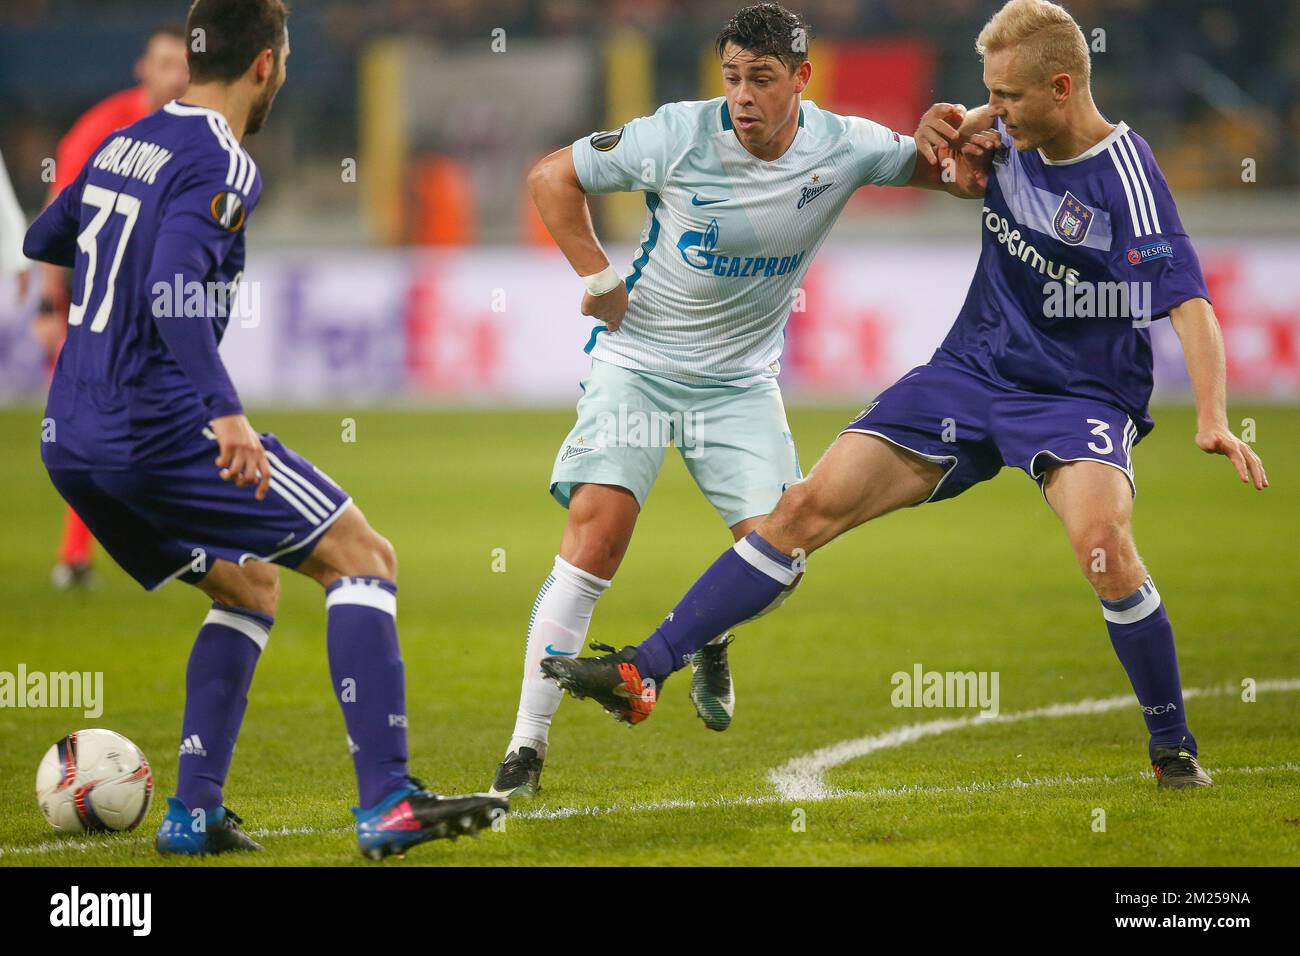 Zenit's midfielder's Giuliano and Anderlecht's Olivier Deschacht fight for the ball during a game between Belgian soccer team RSC Anderlecht and Russian team FC Zenit, first-leg of the 1/16 finals of the Europa League competition, Thursday 16 February 2017, in Brussels. BELGA PHOTO BRUNO FAHY Stock Photo